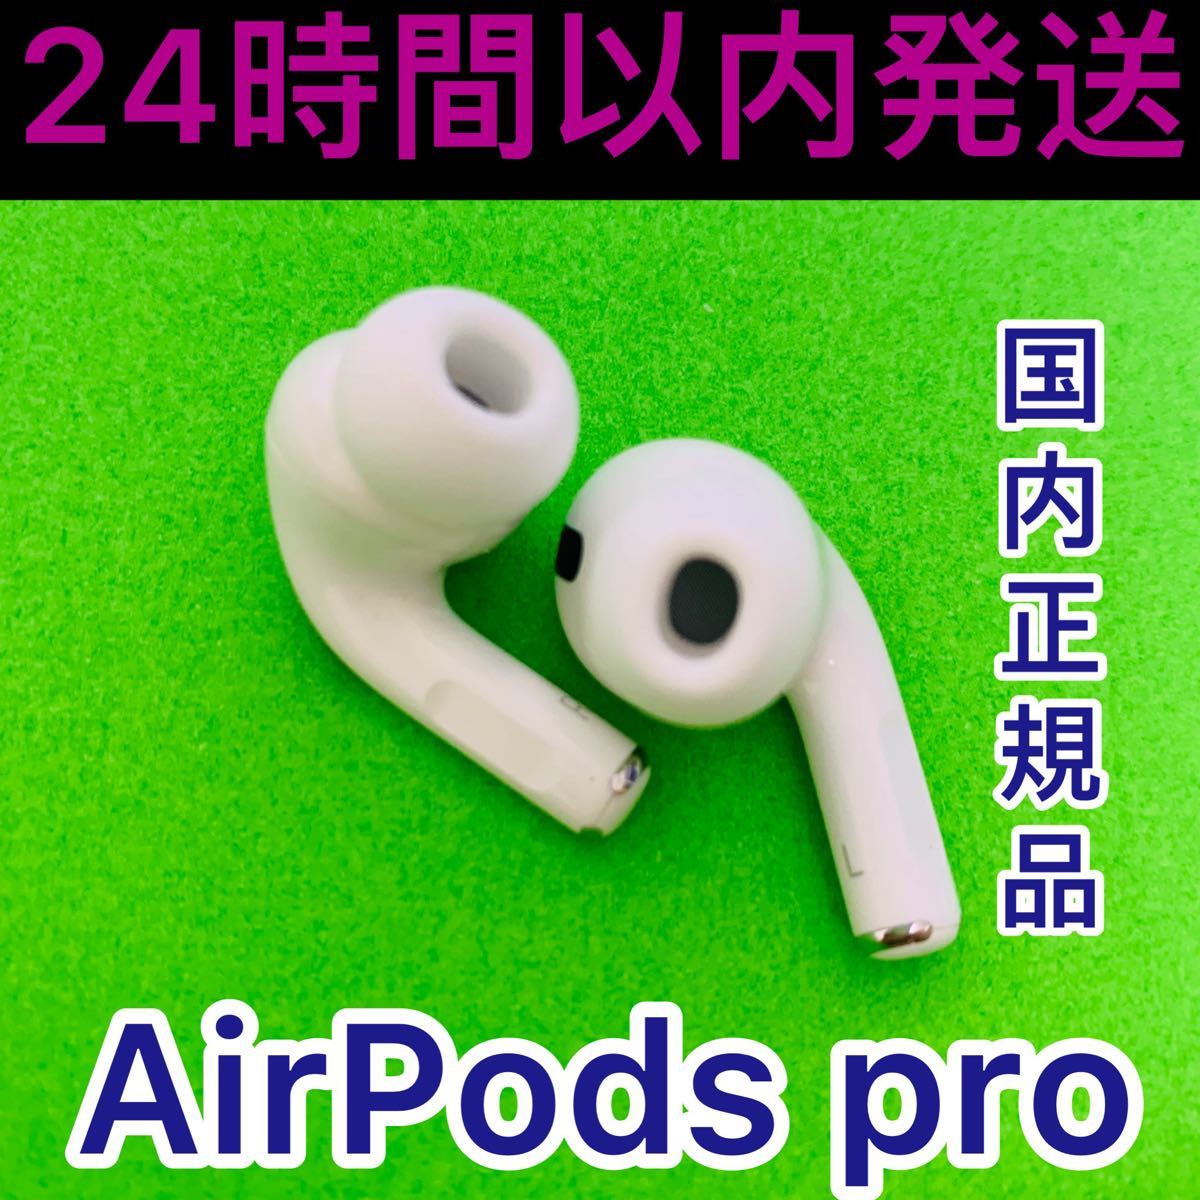 Apple AirPods Pro 24時間以内発送 両耳のみ Bluetooth｜PayPayフリマ